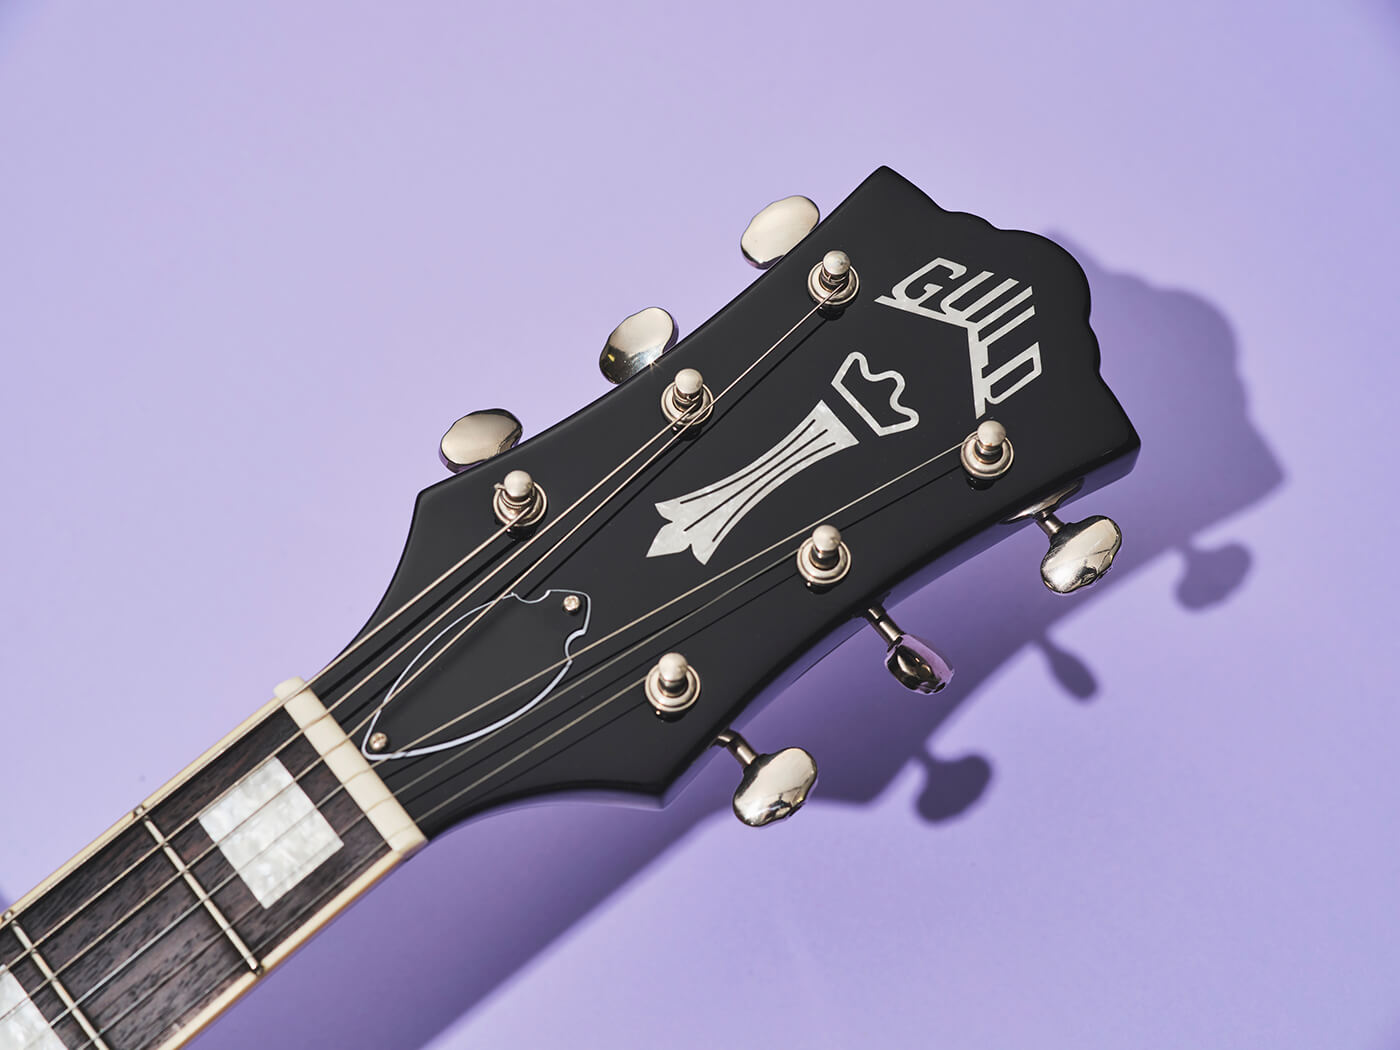 Headstock of the Guild Polara Deluxe in canyon dusk, photo by Adam Gasson